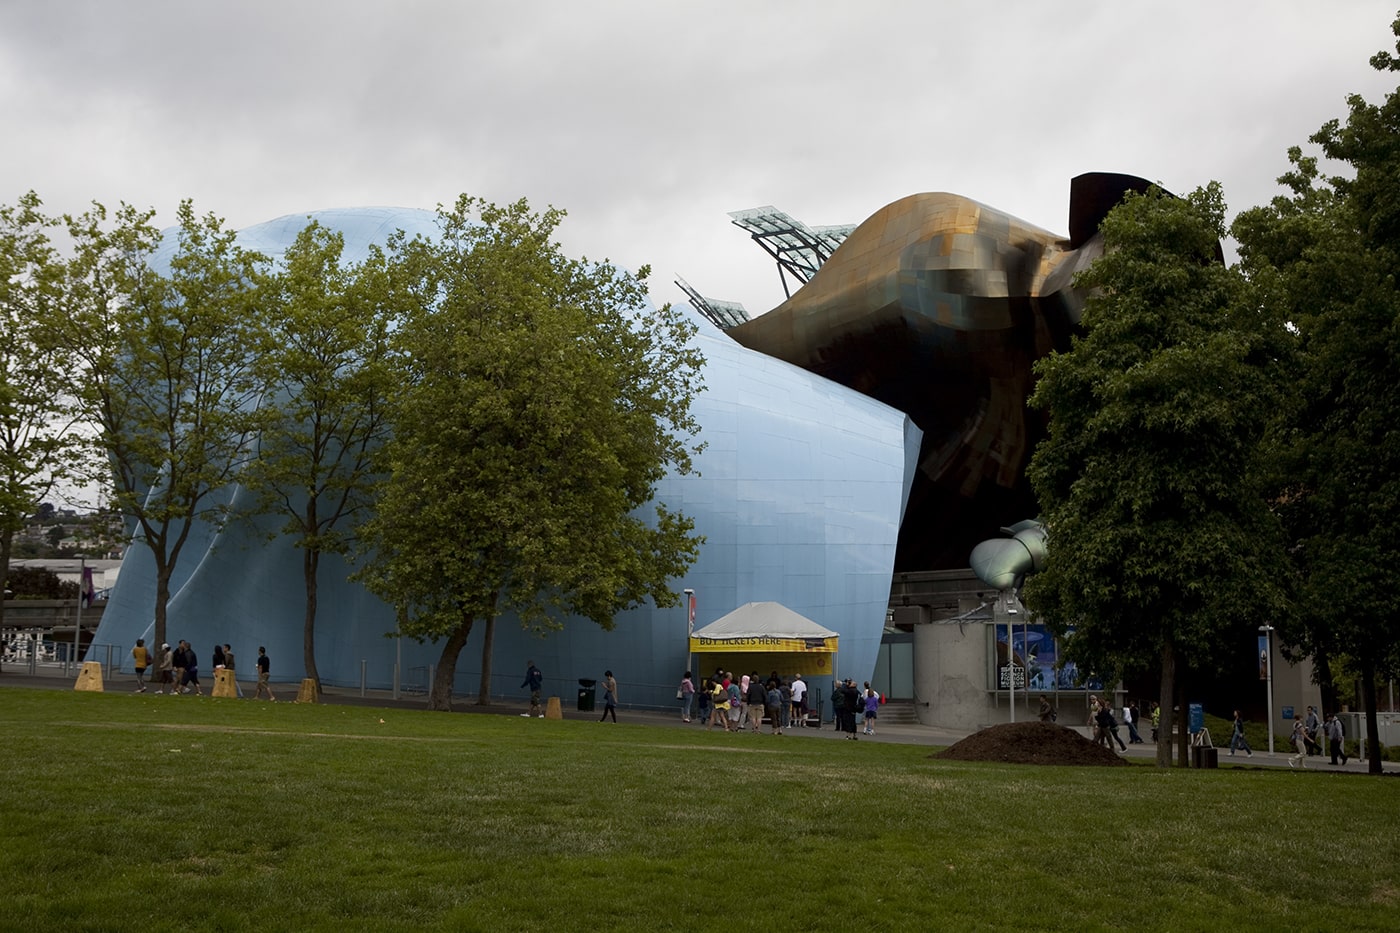 Experience Music Project (EMP) in Seattle, Washington